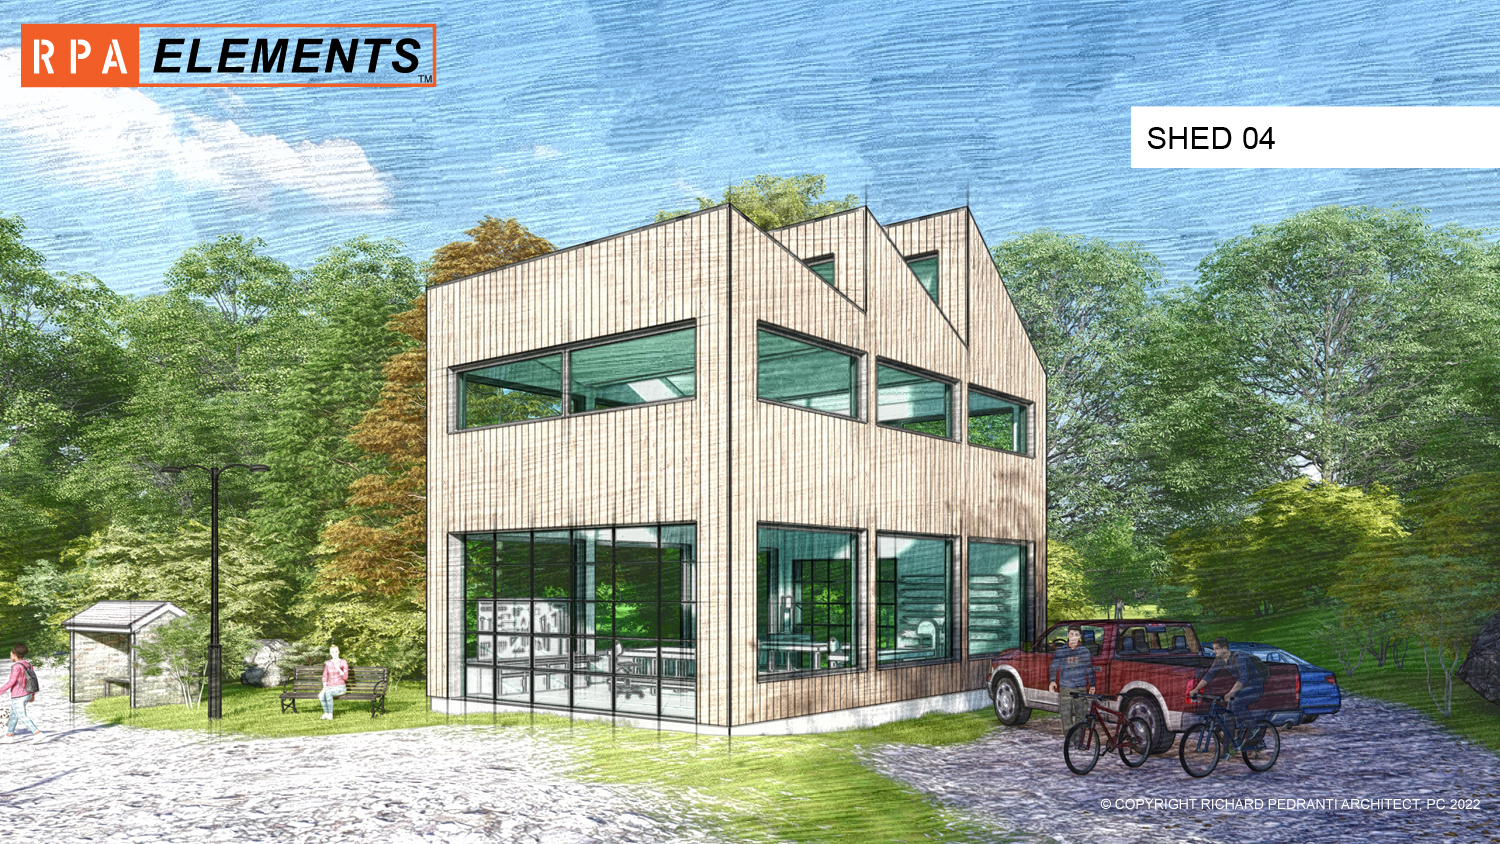 RPA-Elements_Shed04-Forest_Featured-Image